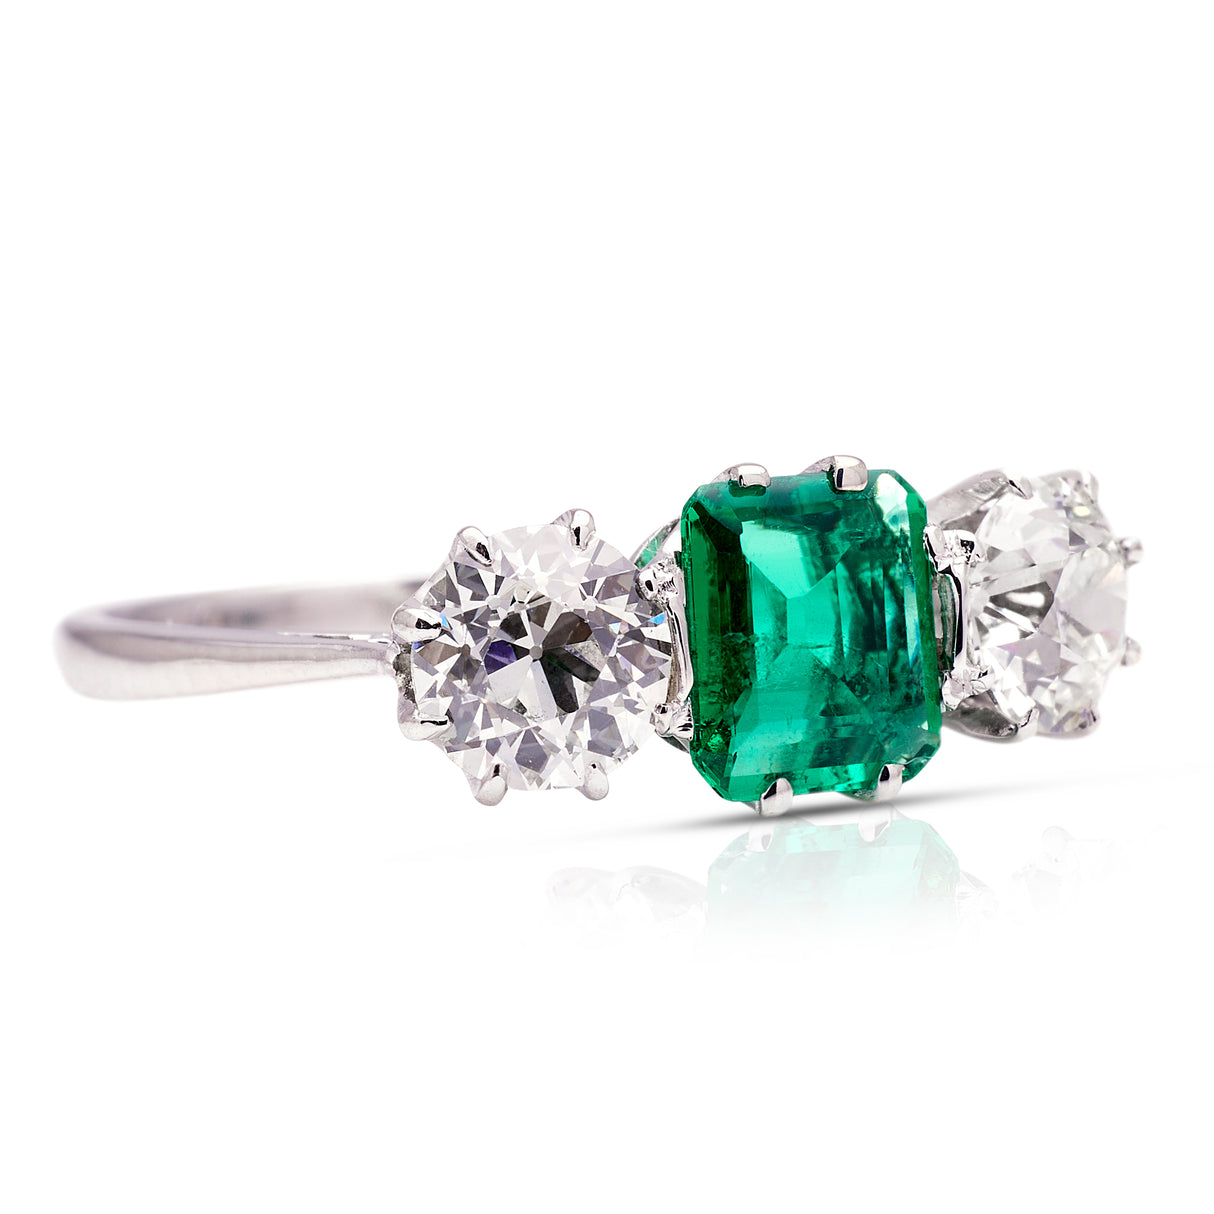 Vintage Art Deco three-stone emerald and diamond engagement ring, side view. 